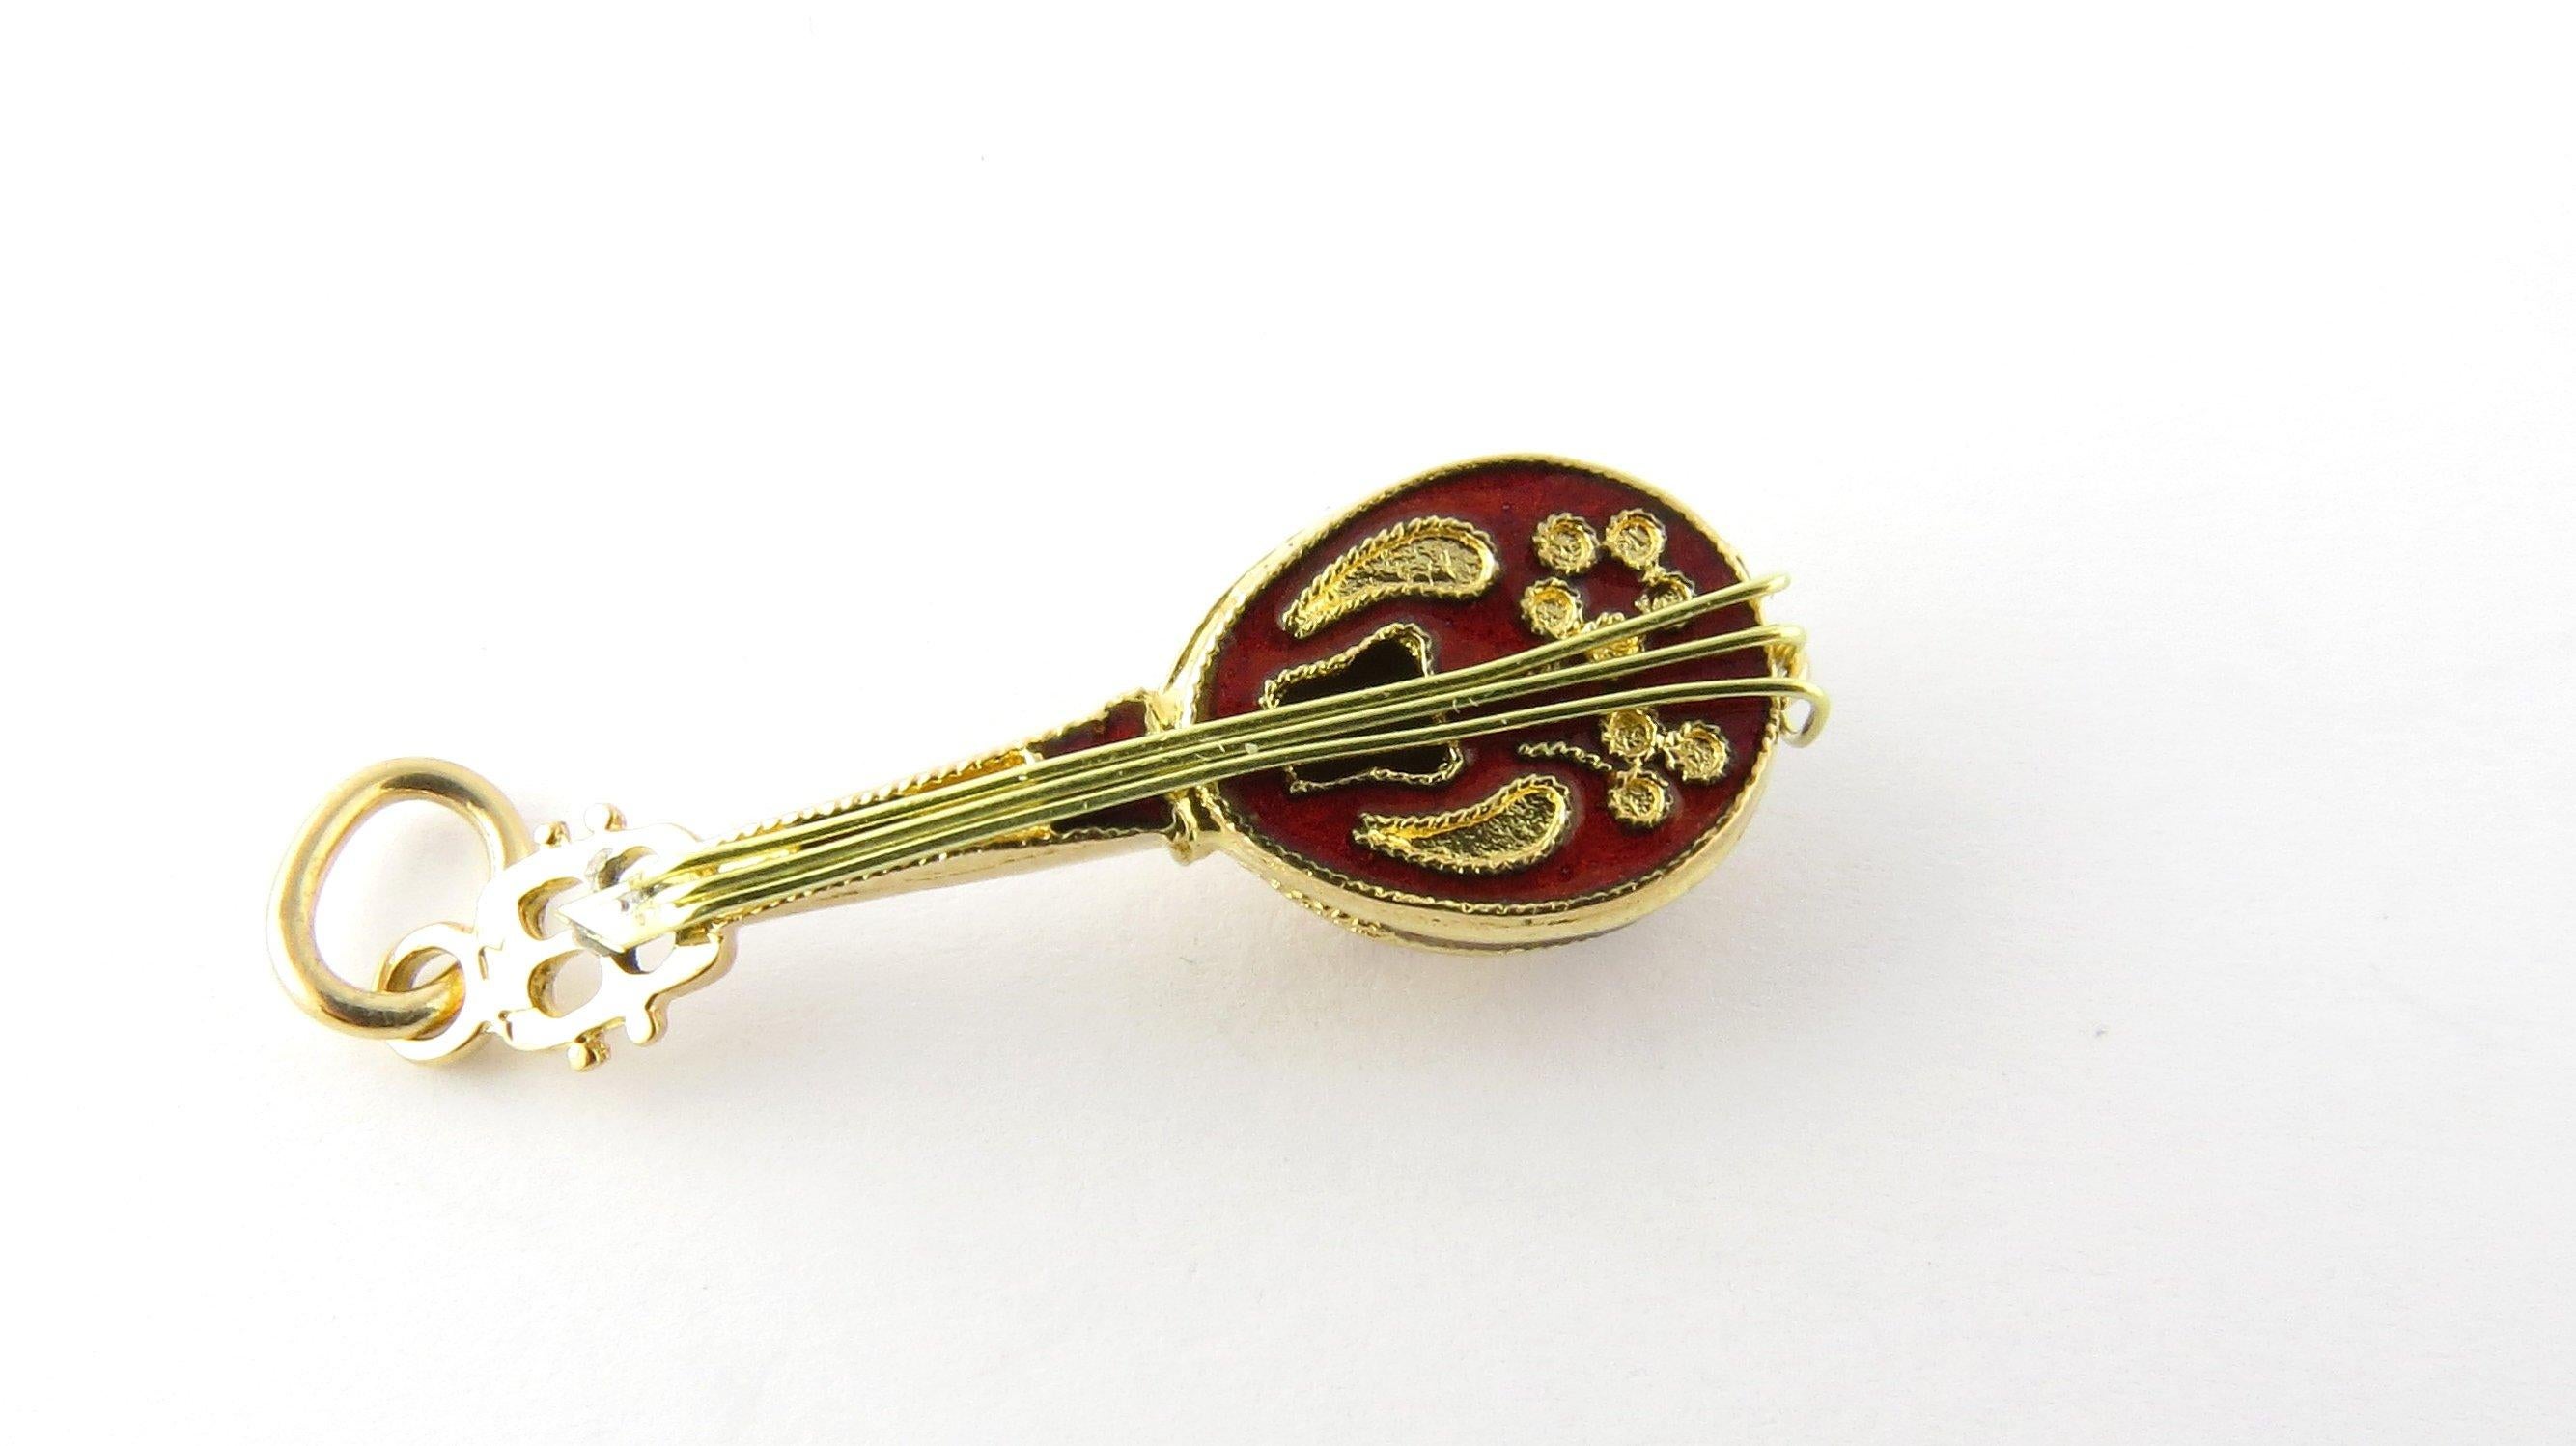 Vintage 18 Karat Yellow Gold Mandolin Charm

Perfect gift for the musician in your life!

This 3D charm features a miniature mandolin meticulously detailed in 18K yellow gold and accented with red enamel.

Size: 29 mm x 10 mm (actual charm)

Weight: